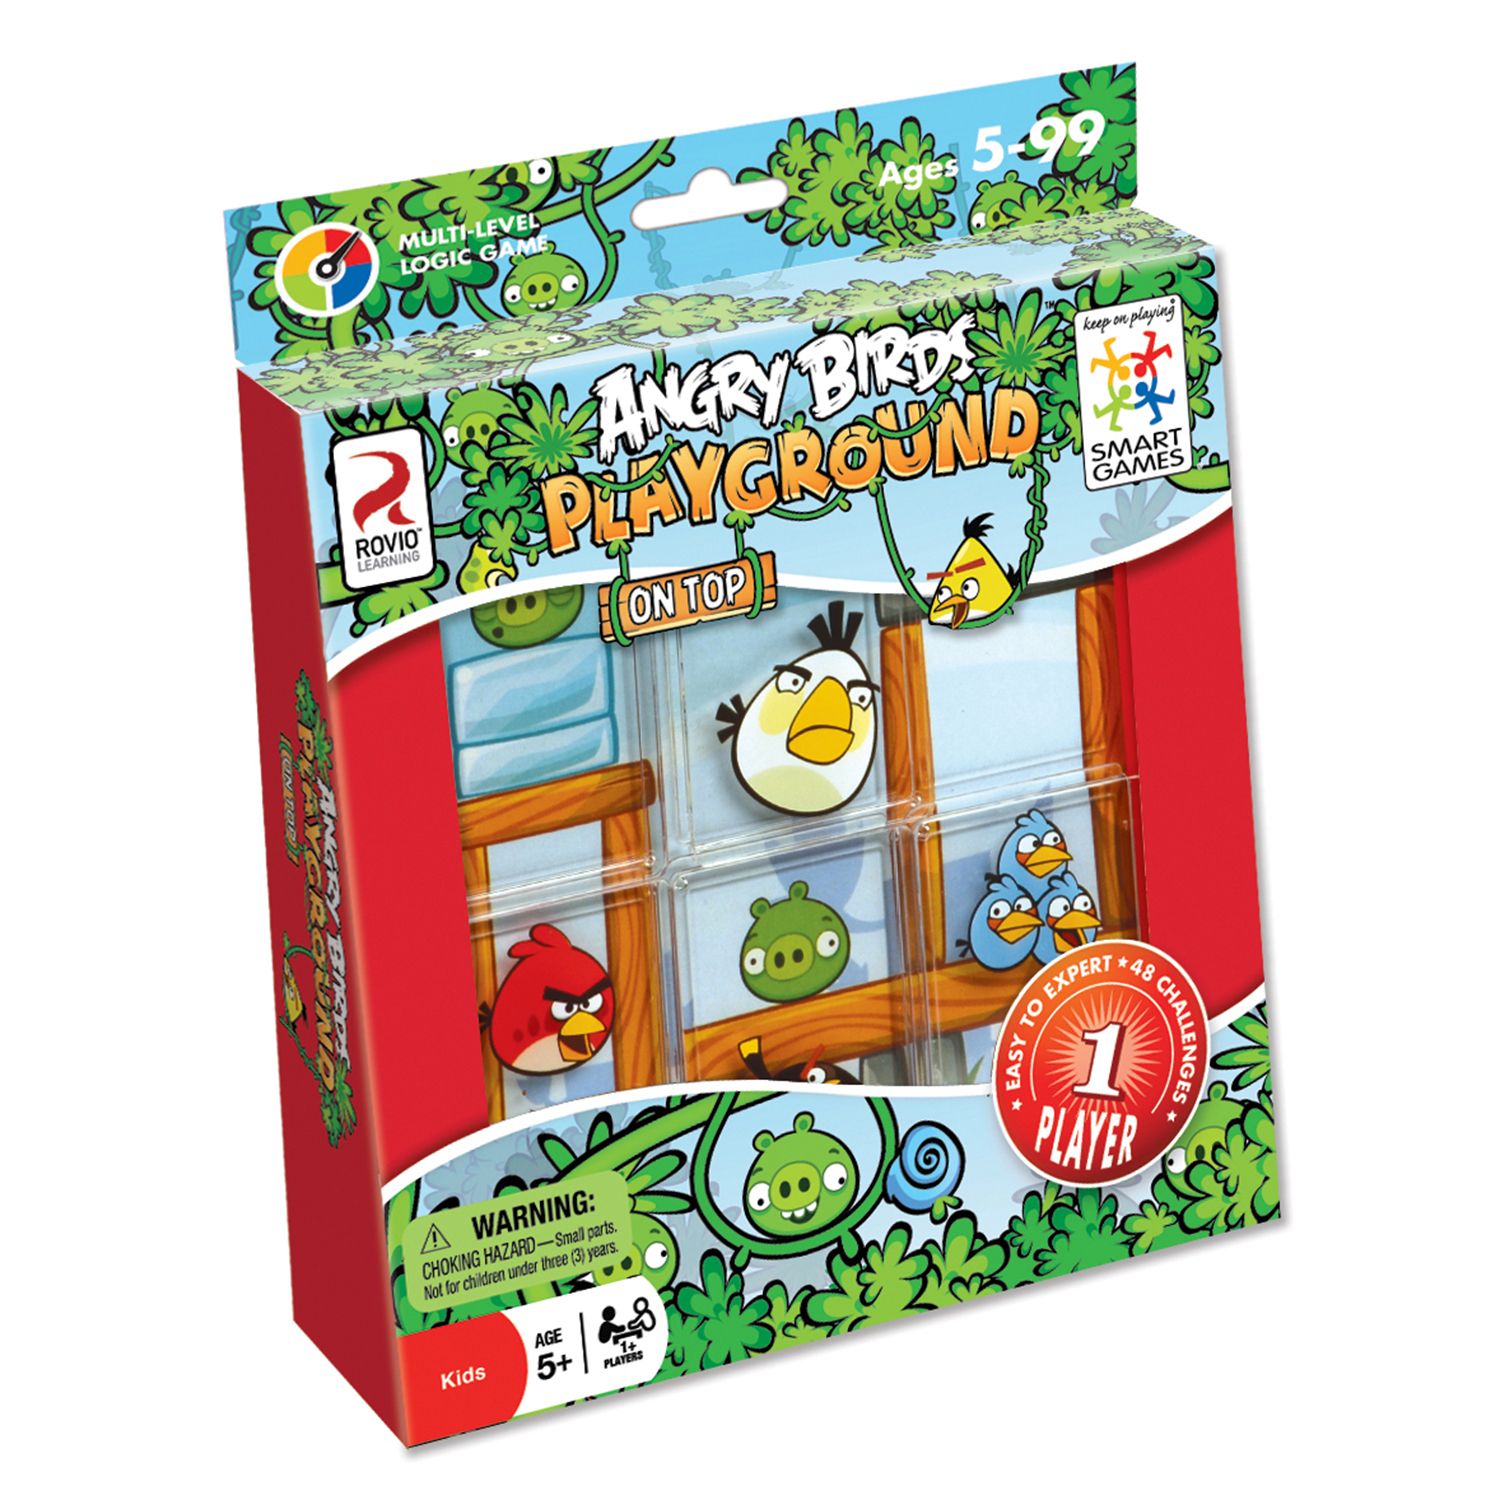 angry birds game toys